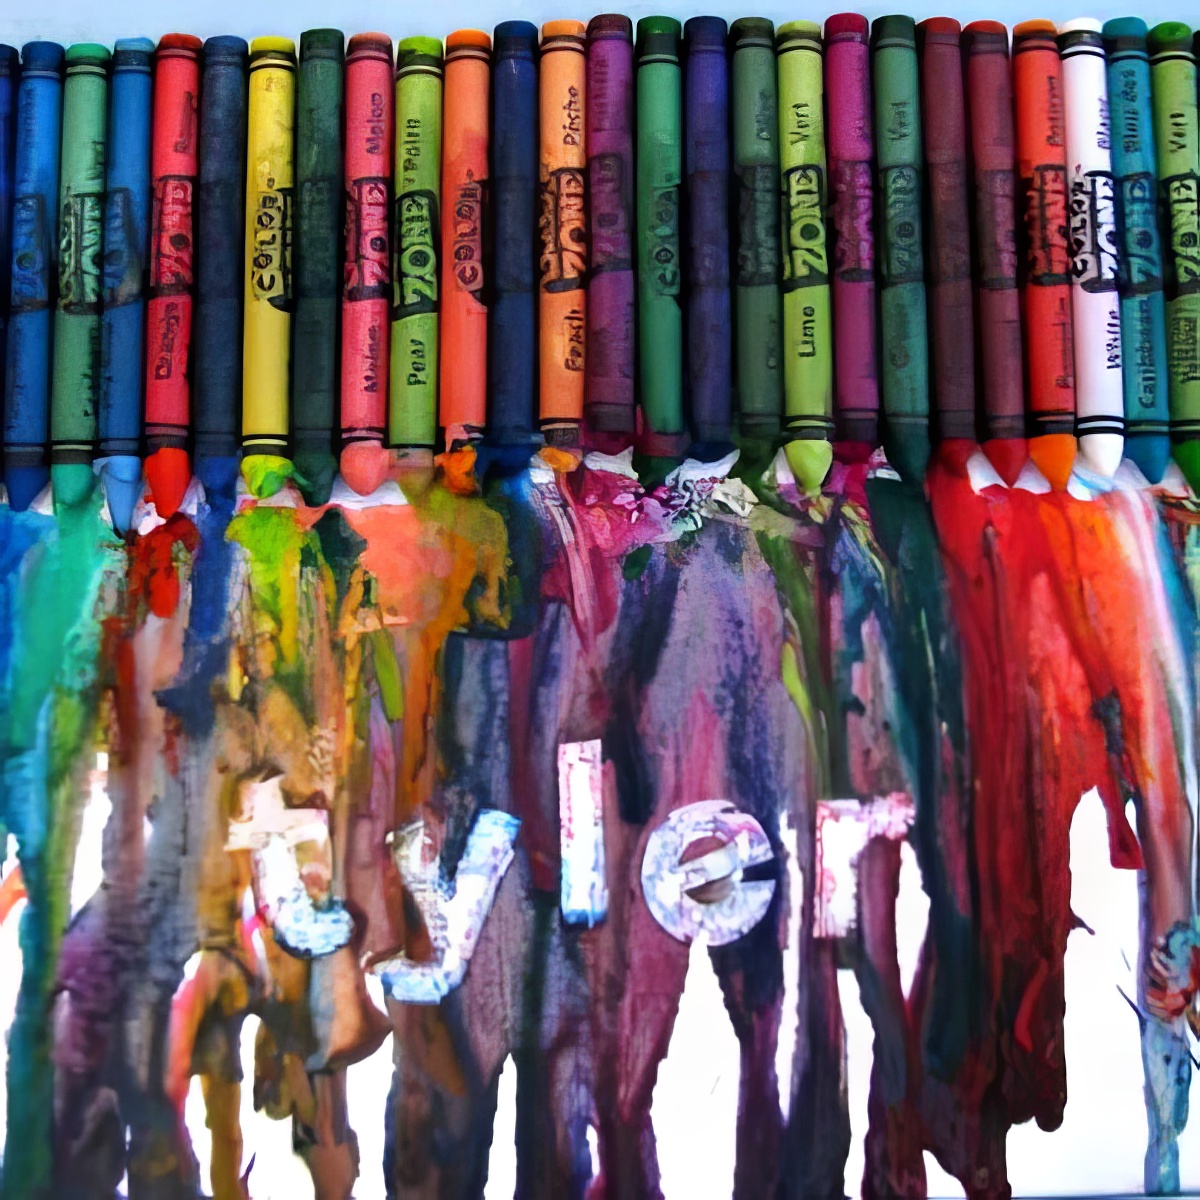 melted crayon art, easy art activities, 13 Easy Art Activities For Your 5-Year-Old, colorful art activities, activities with colors, art activities for 5-year-olds